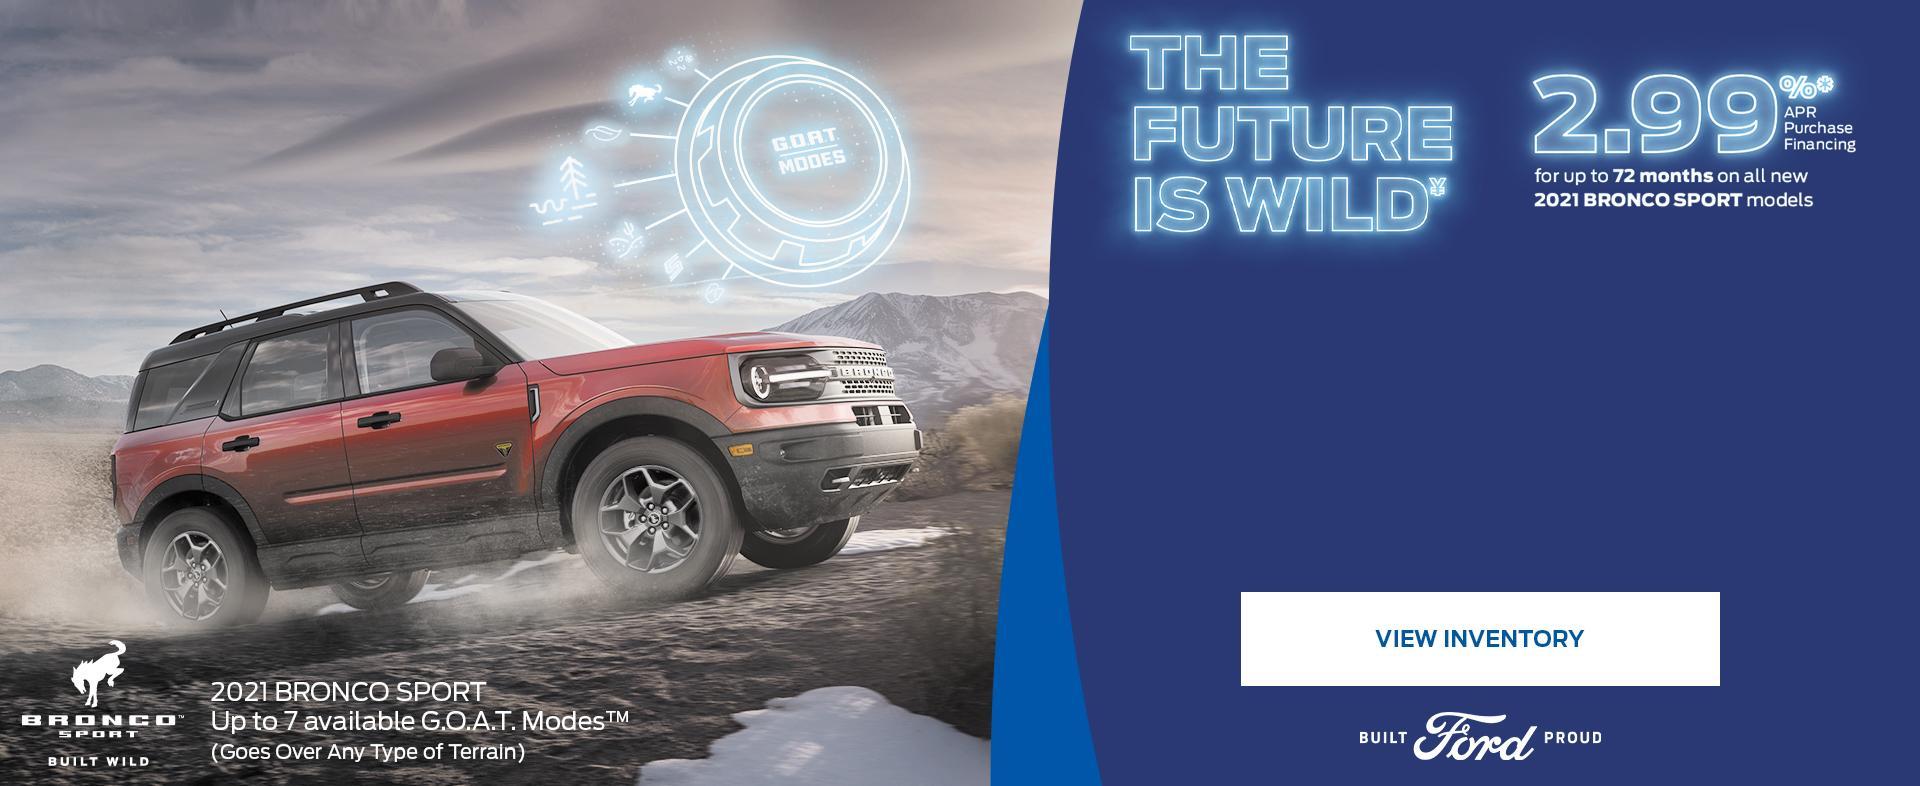 2021 Ford Bronco | Future of Wild | Ford of Canada